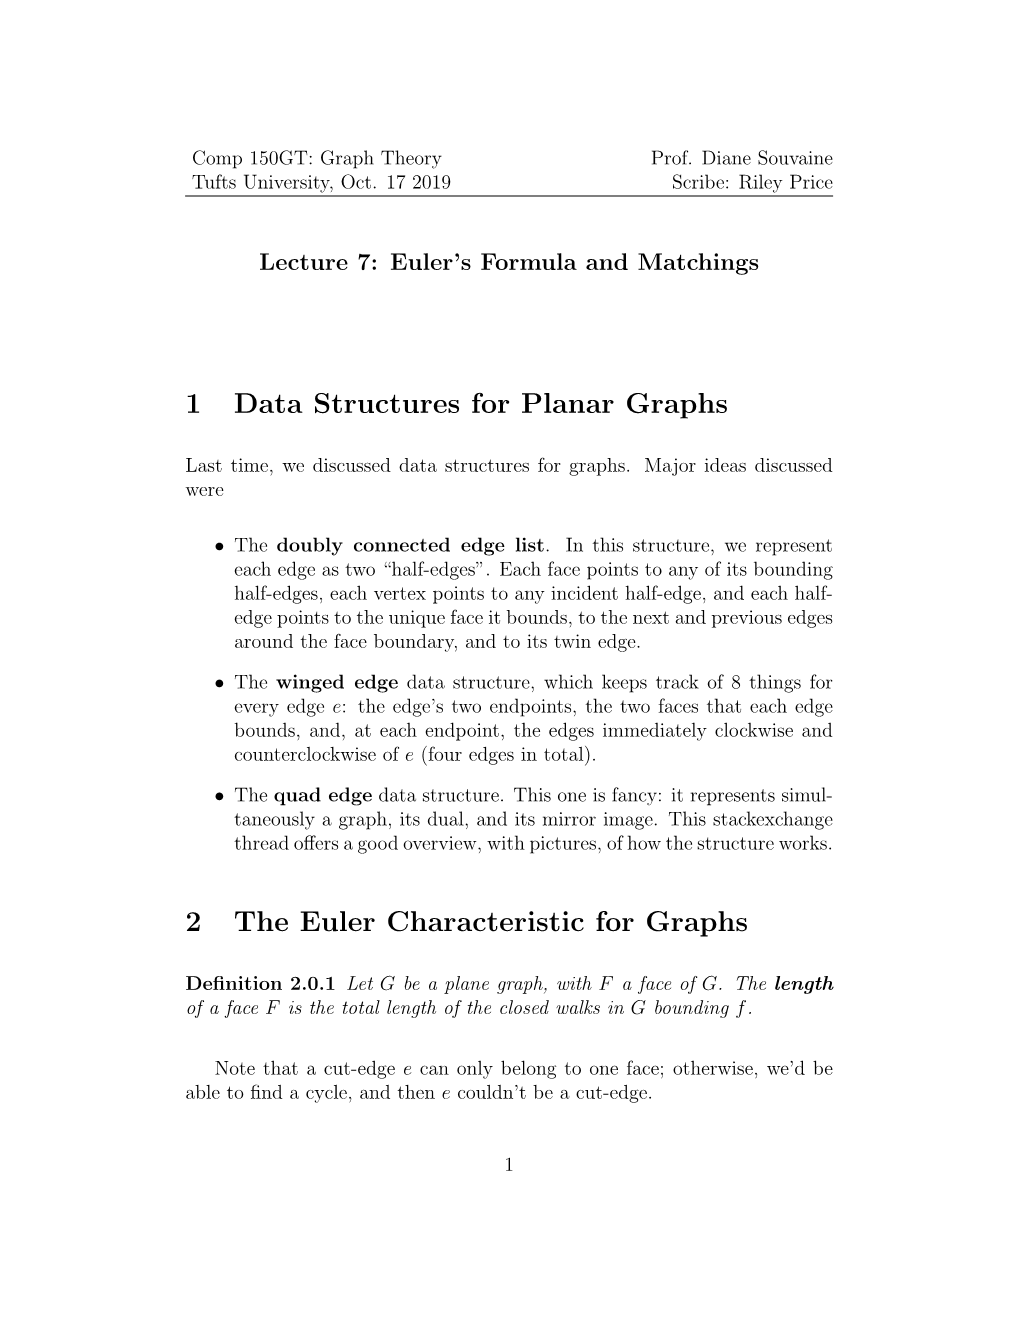 1 Data Structures for Planar Graphs 2 the Euler Characteristic for Graphs